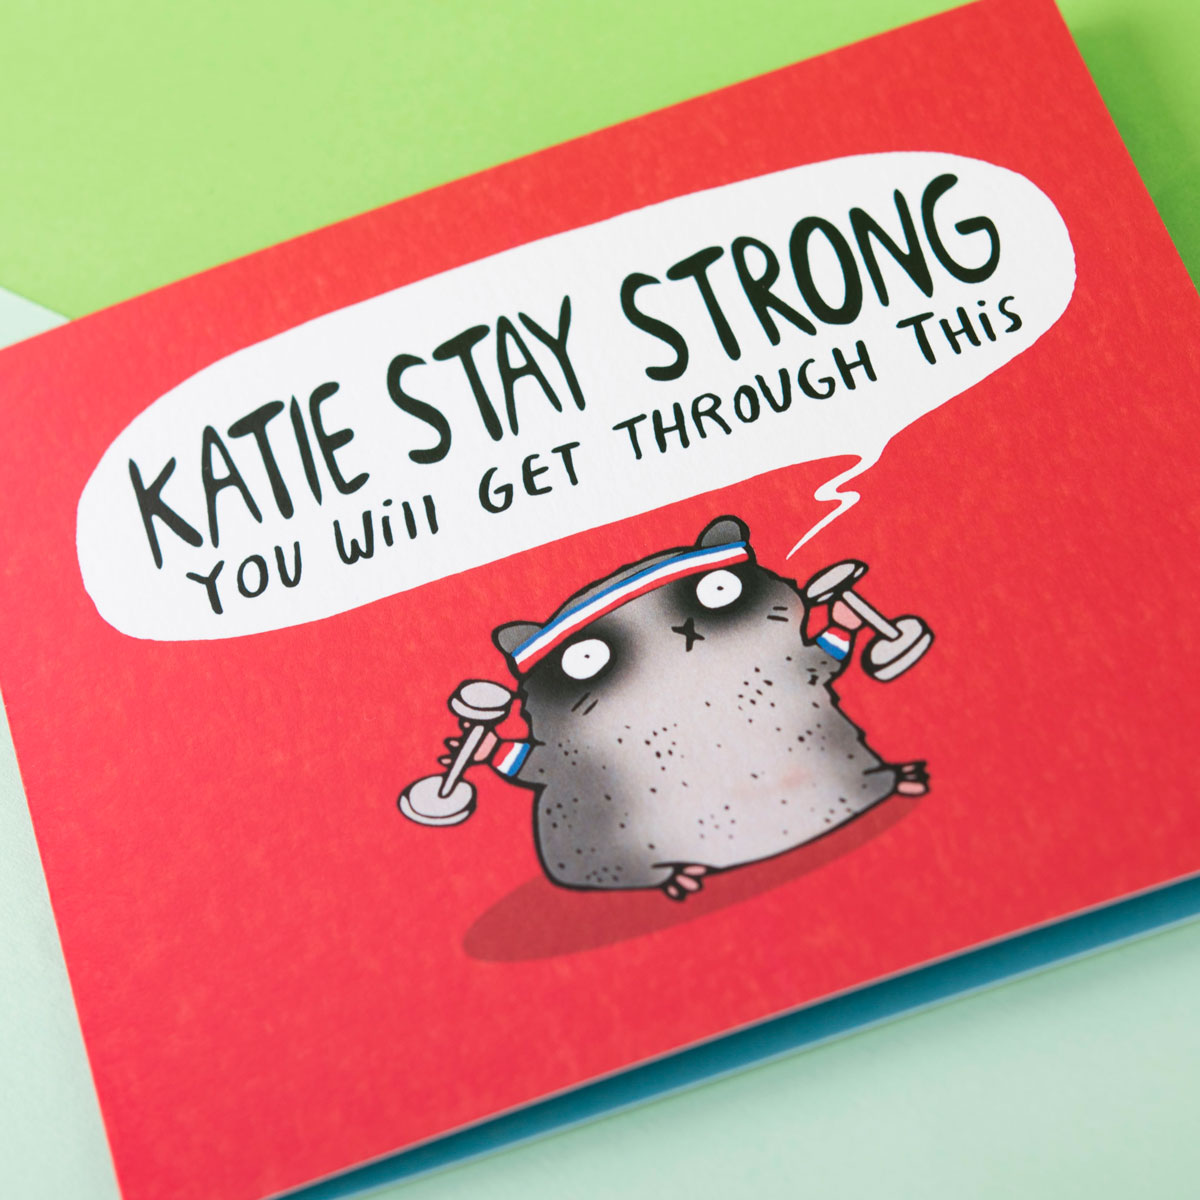 Personalised Katie Abey Card - Stay Strong